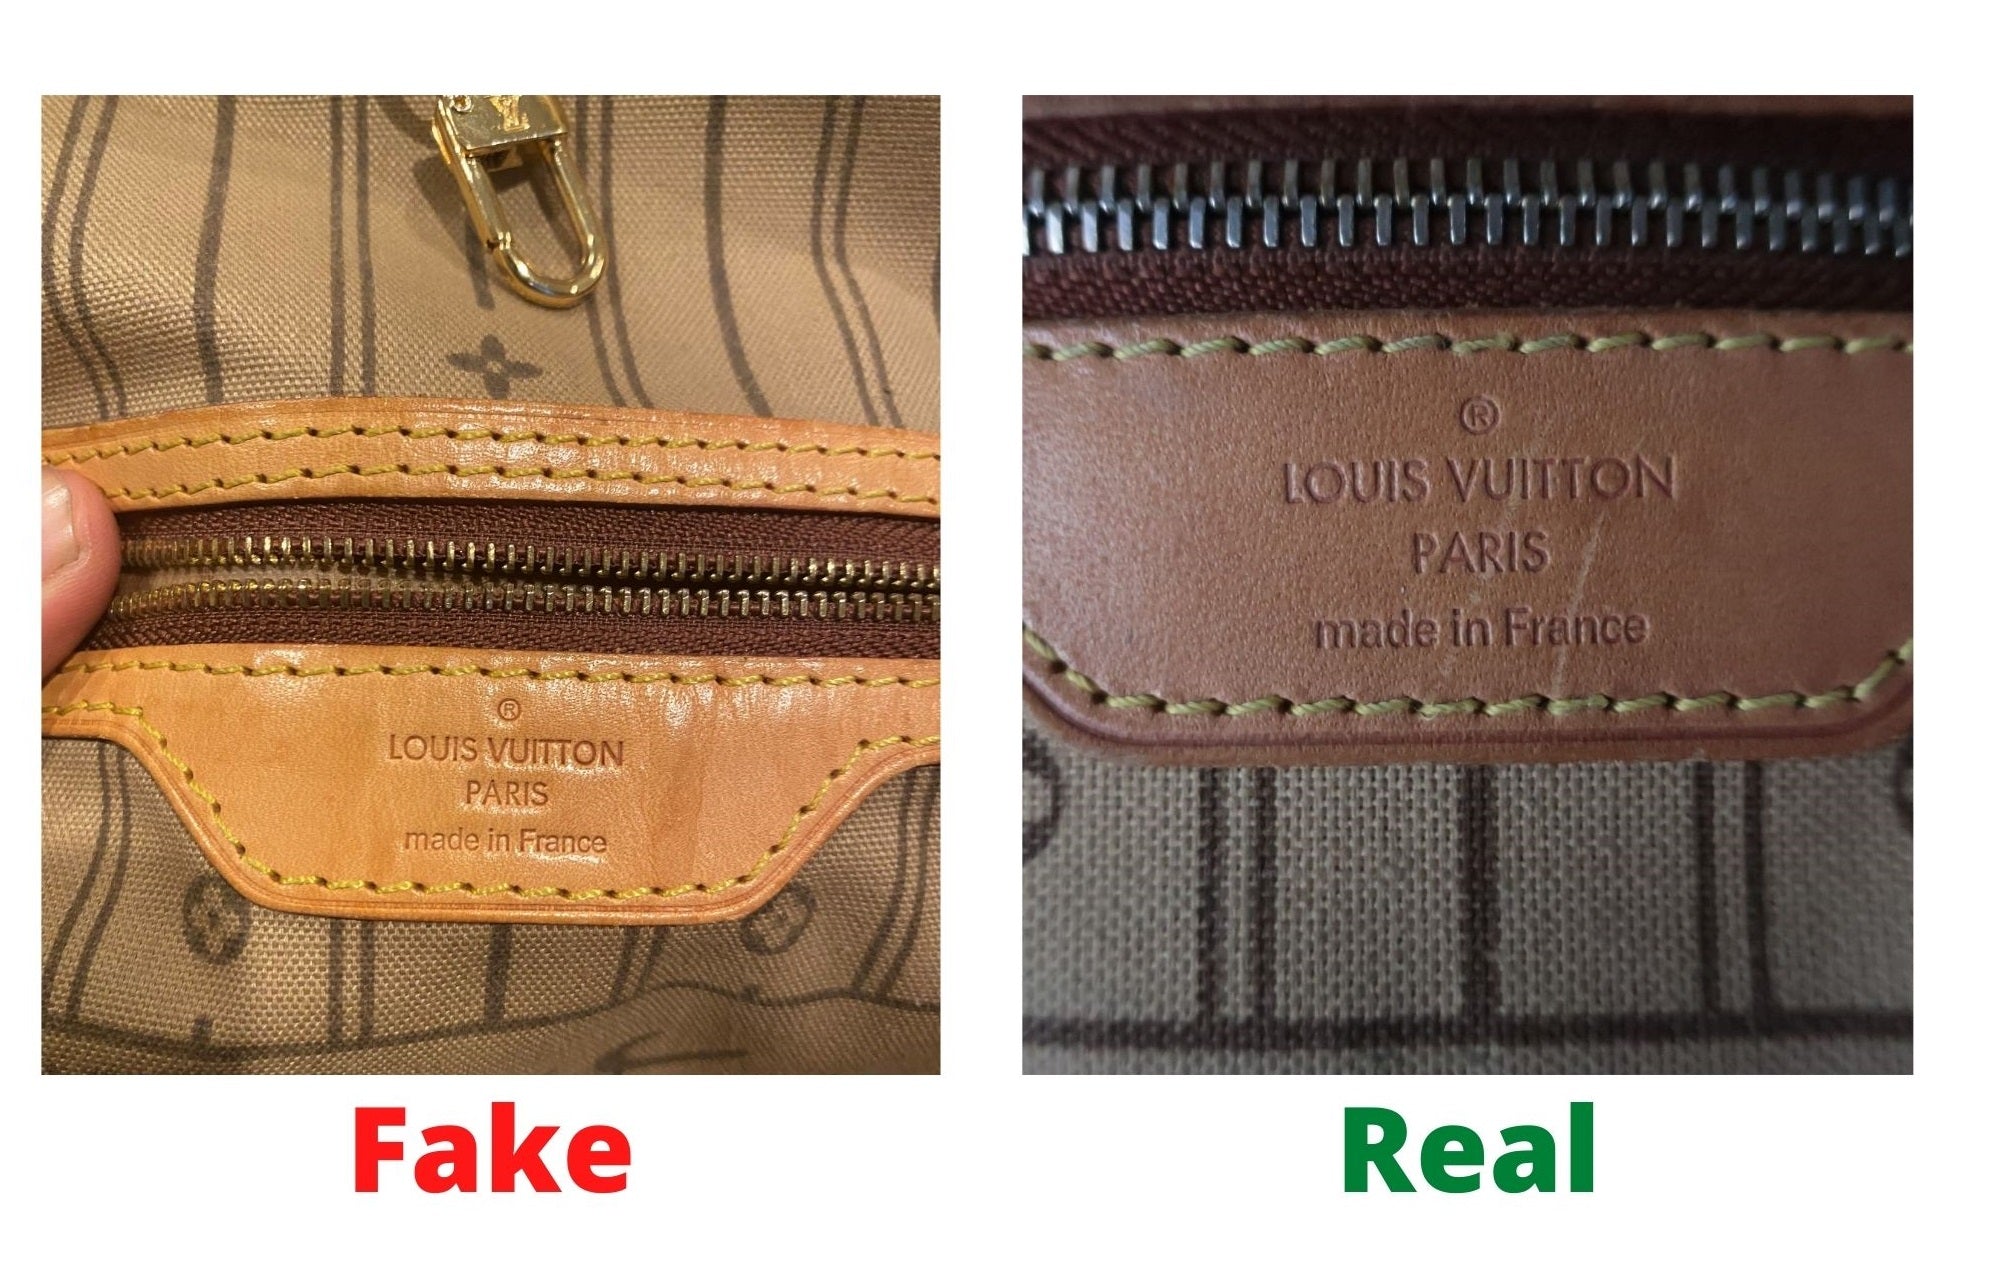 Fake Louis Vuitton Neverfull vs Real: Important Details You Should Definitely Pay Attention To (With Photo Examples) neverfull monogram real vs fake heat stamp